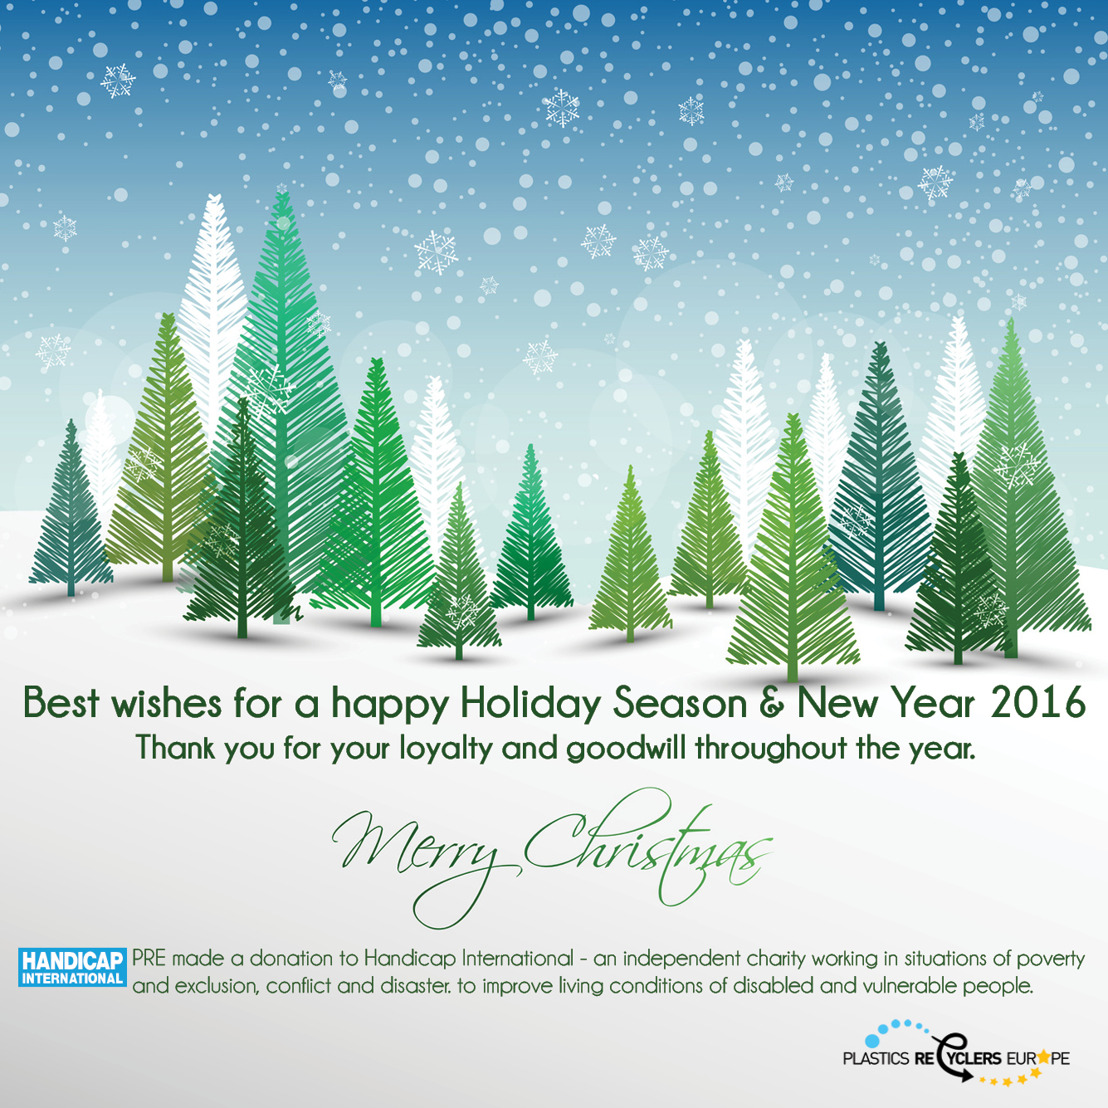 Best wishes for a Happy Holiday Season & New Year 2016